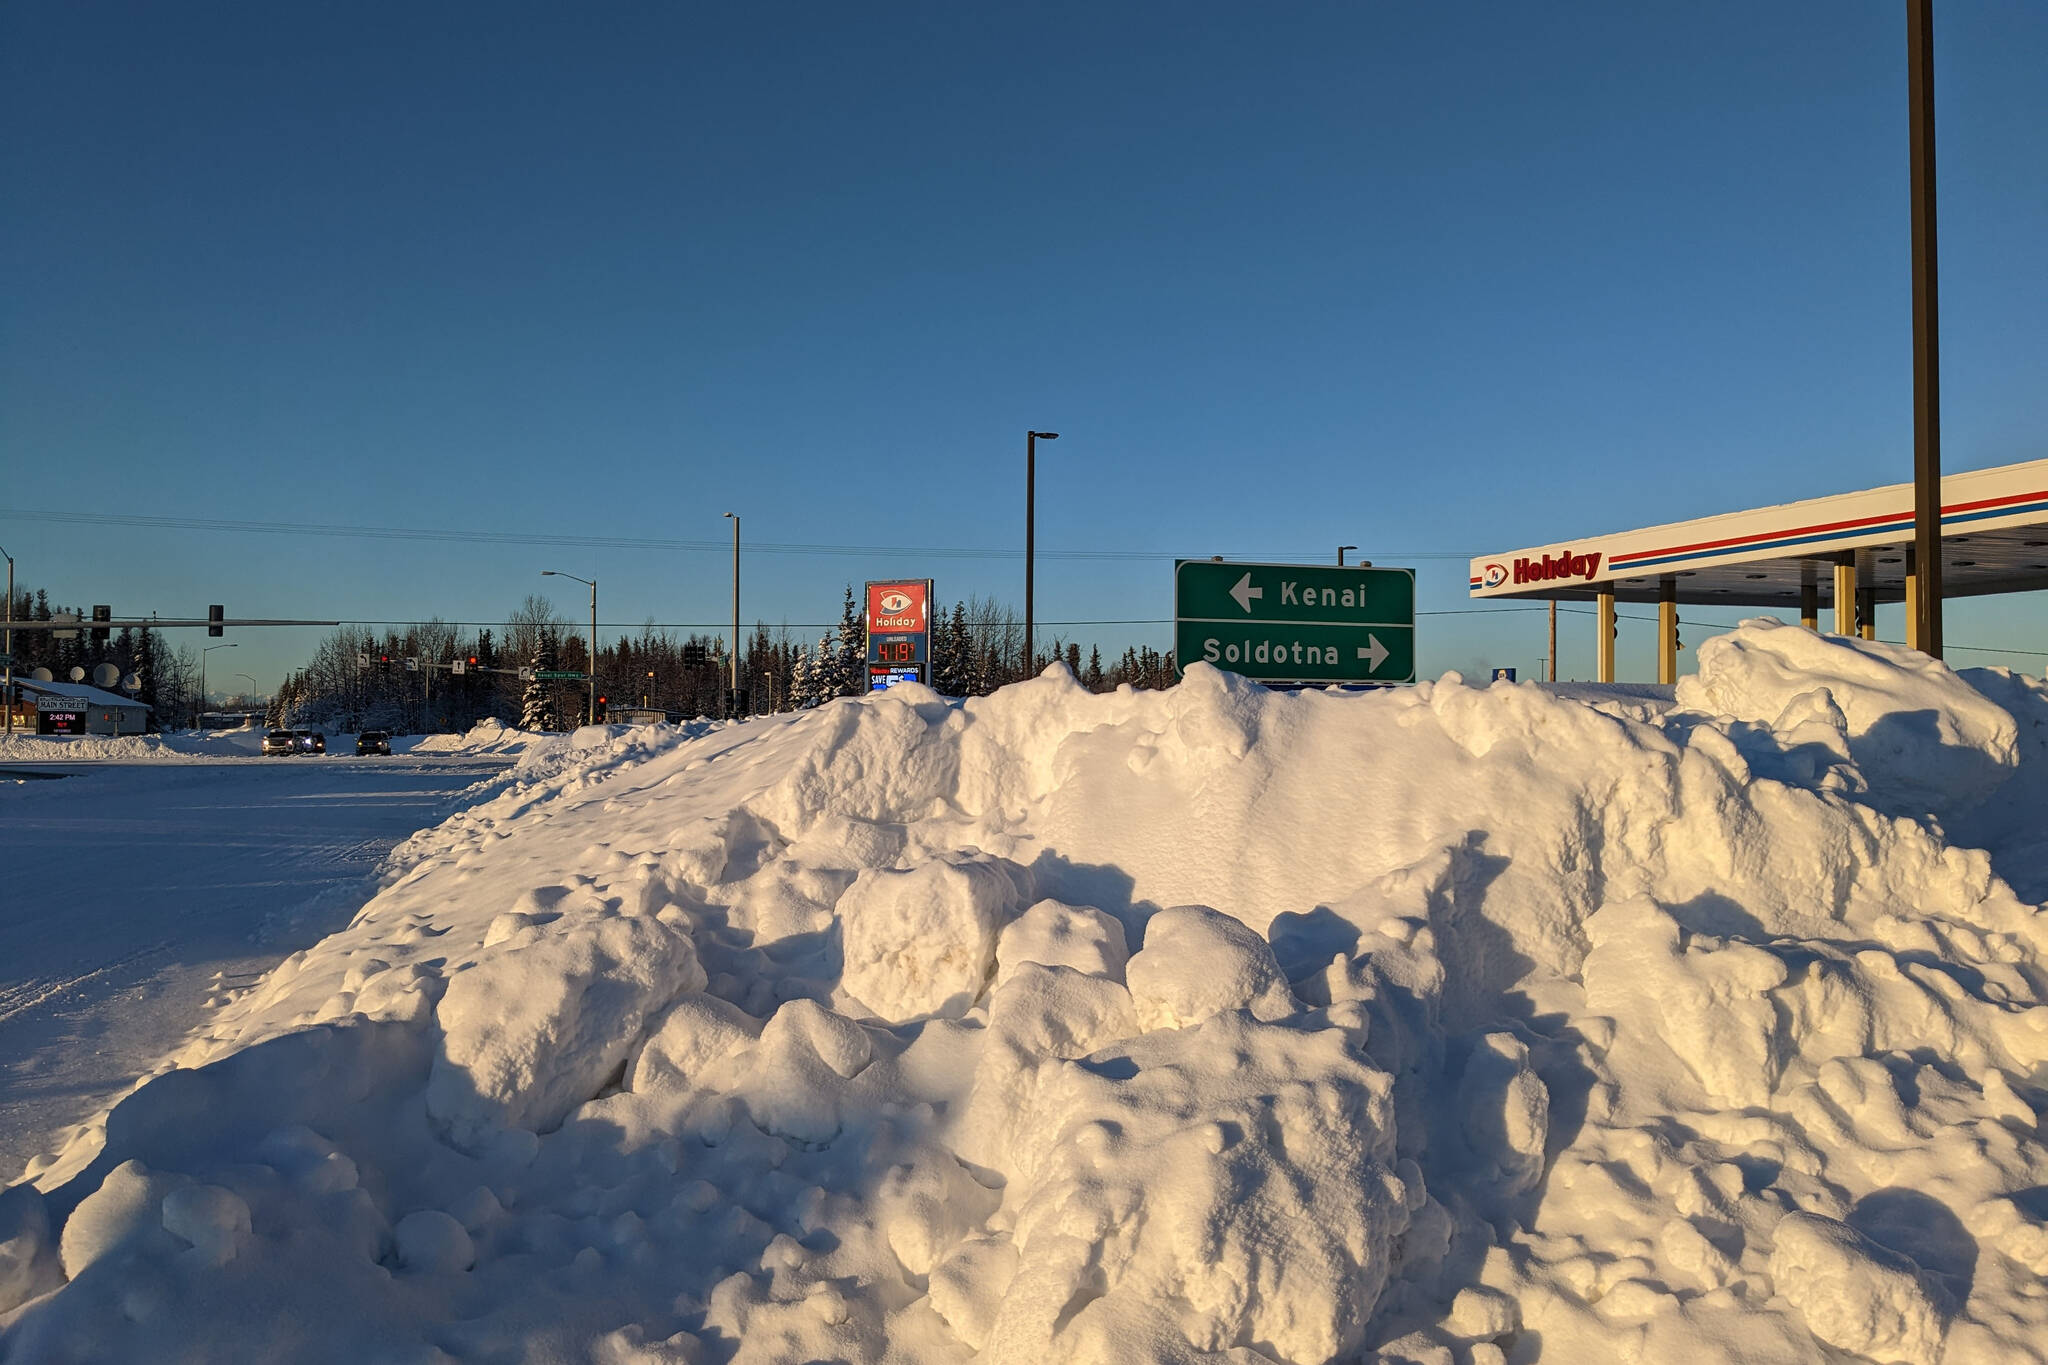 Plowed snow is piled high near the intersection of Main Street Loop and Kenai Spur Highway, Monday, Dec. 12, 2022, in Kenai, Alaska. The area received several feet of snow over the weekend. (Photo by Erin Thompson/Peninsula Clarion)